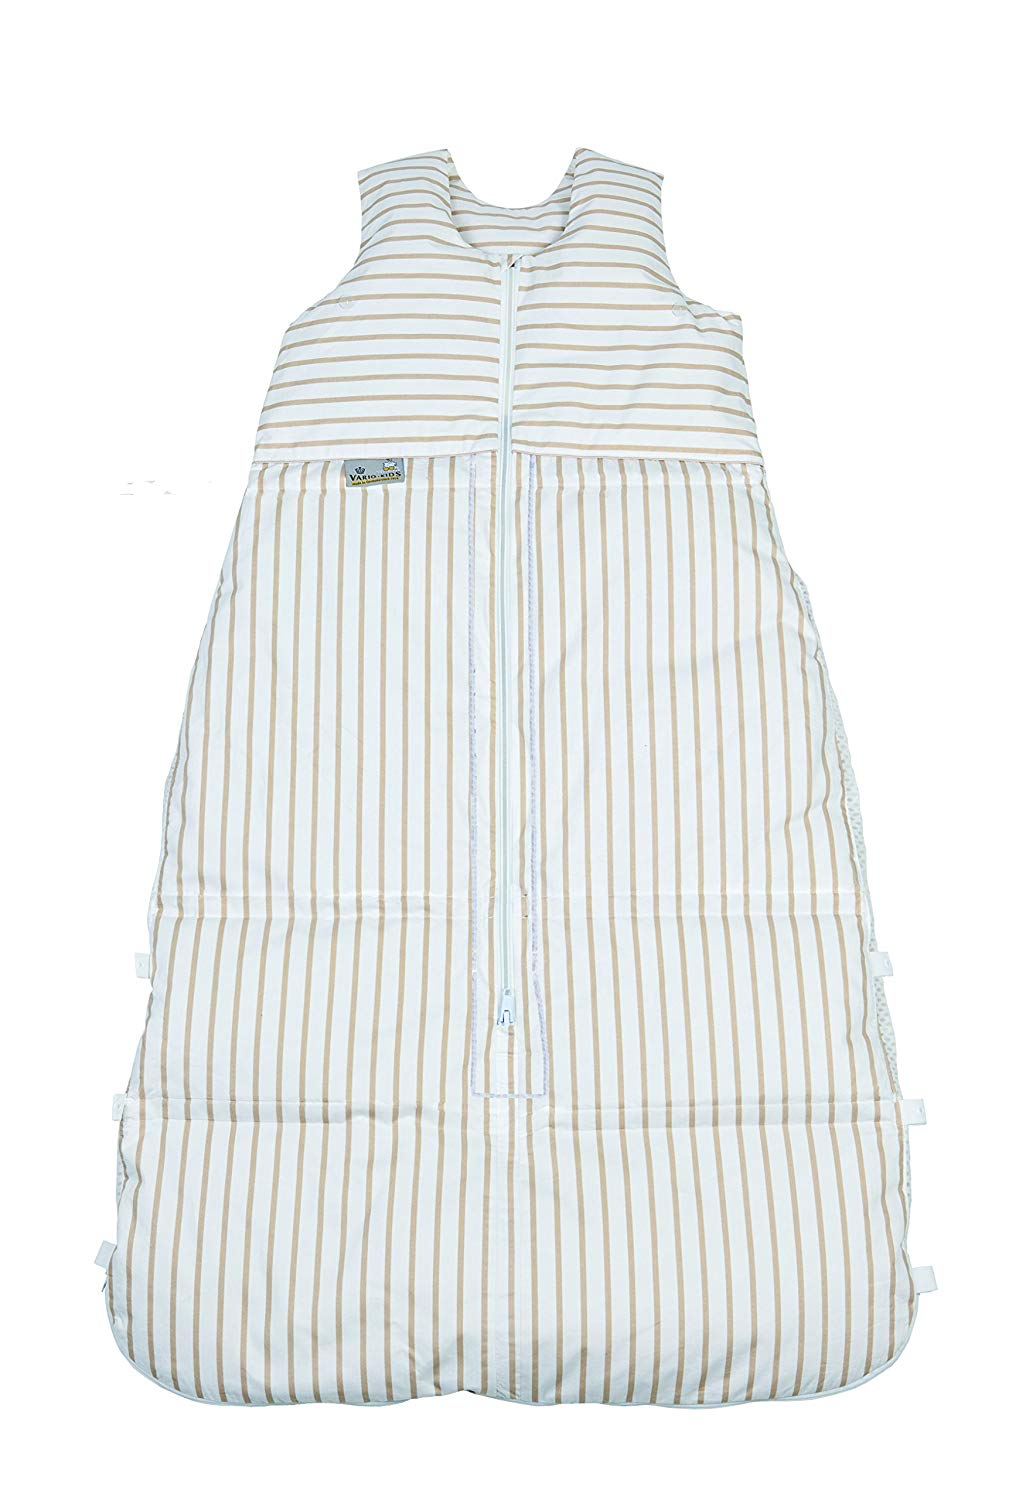 Climarelle Down Sleeping Bag Adjustable Length Age Approximately 12-24 Months White Stripes 110 cm